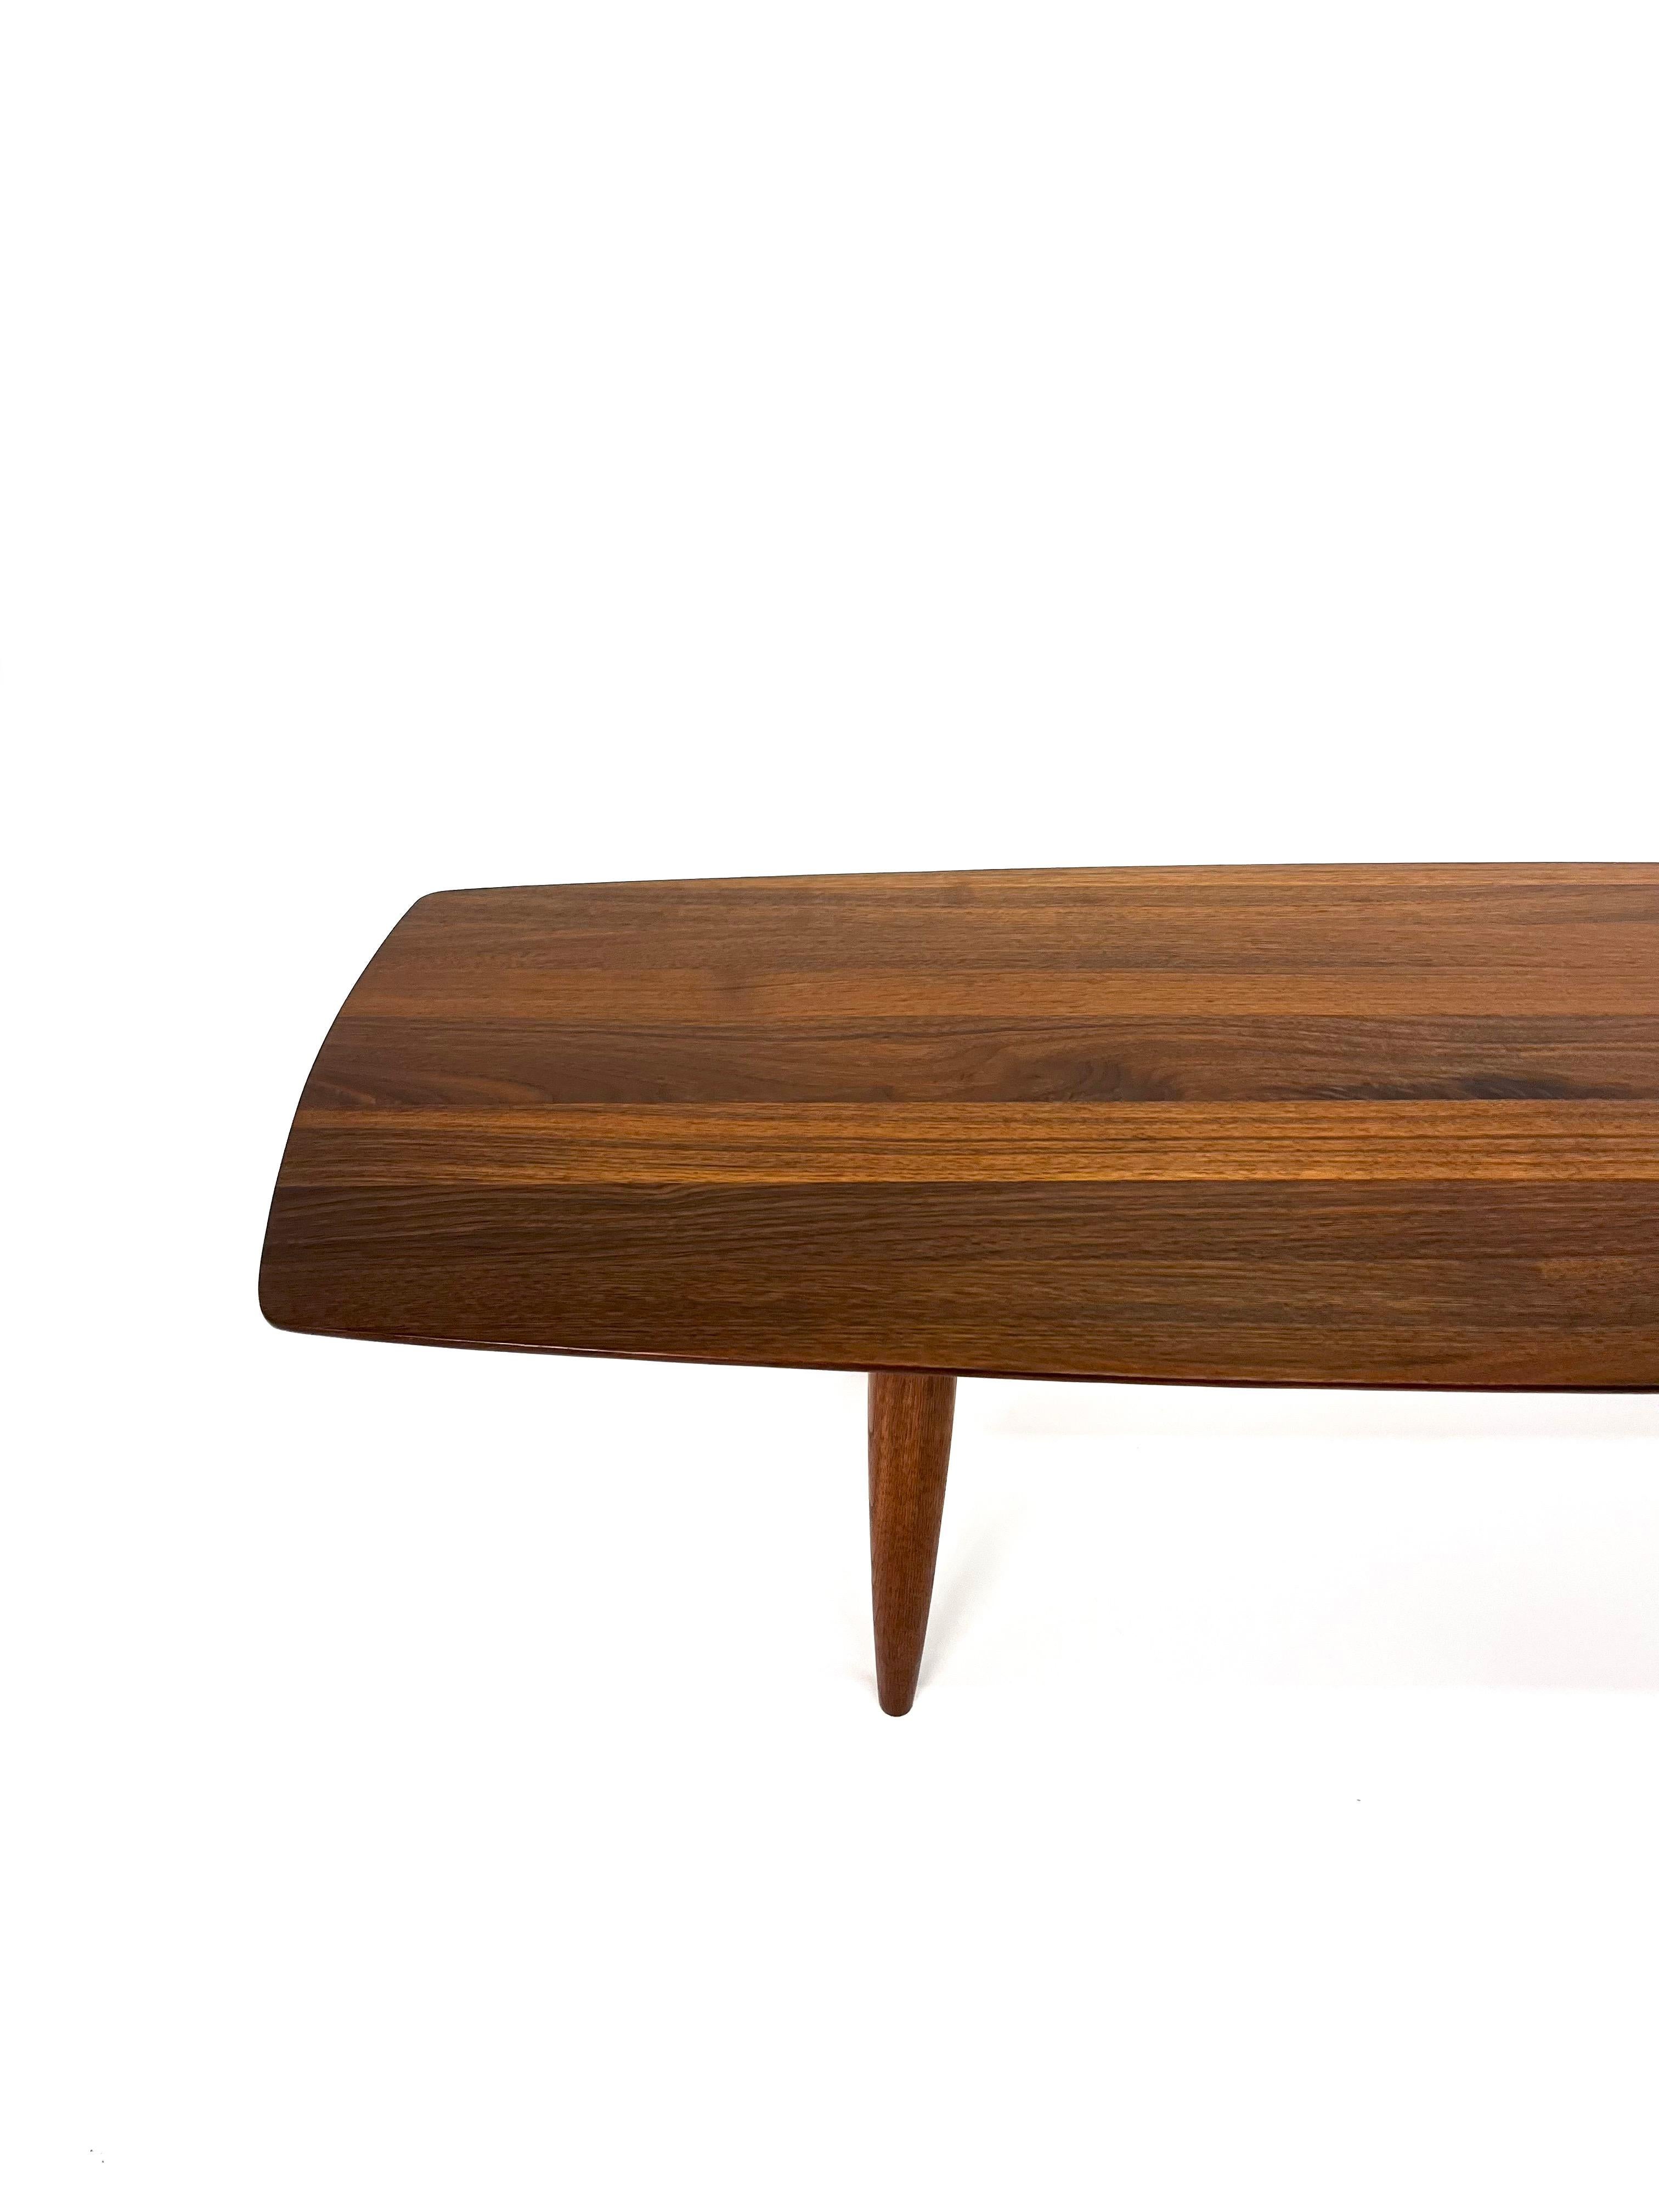 20th Century Solid Walnut Coffee Table by Ace Hi For Sale